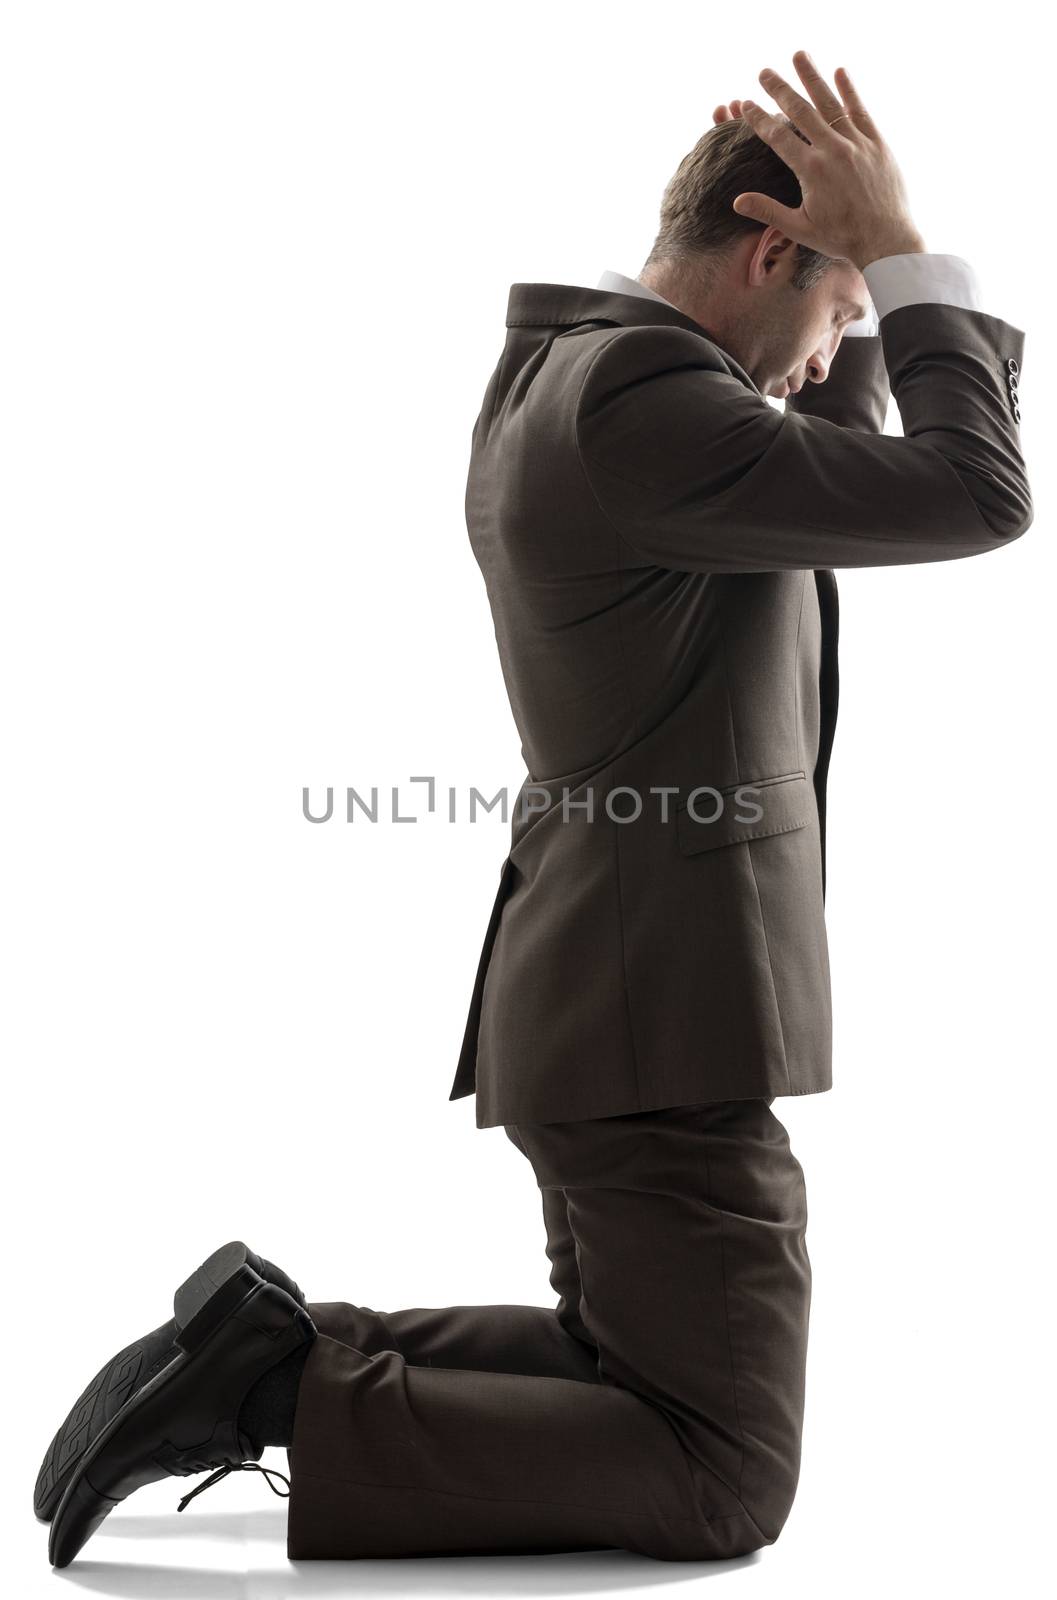 Isolated business man pray position on white background